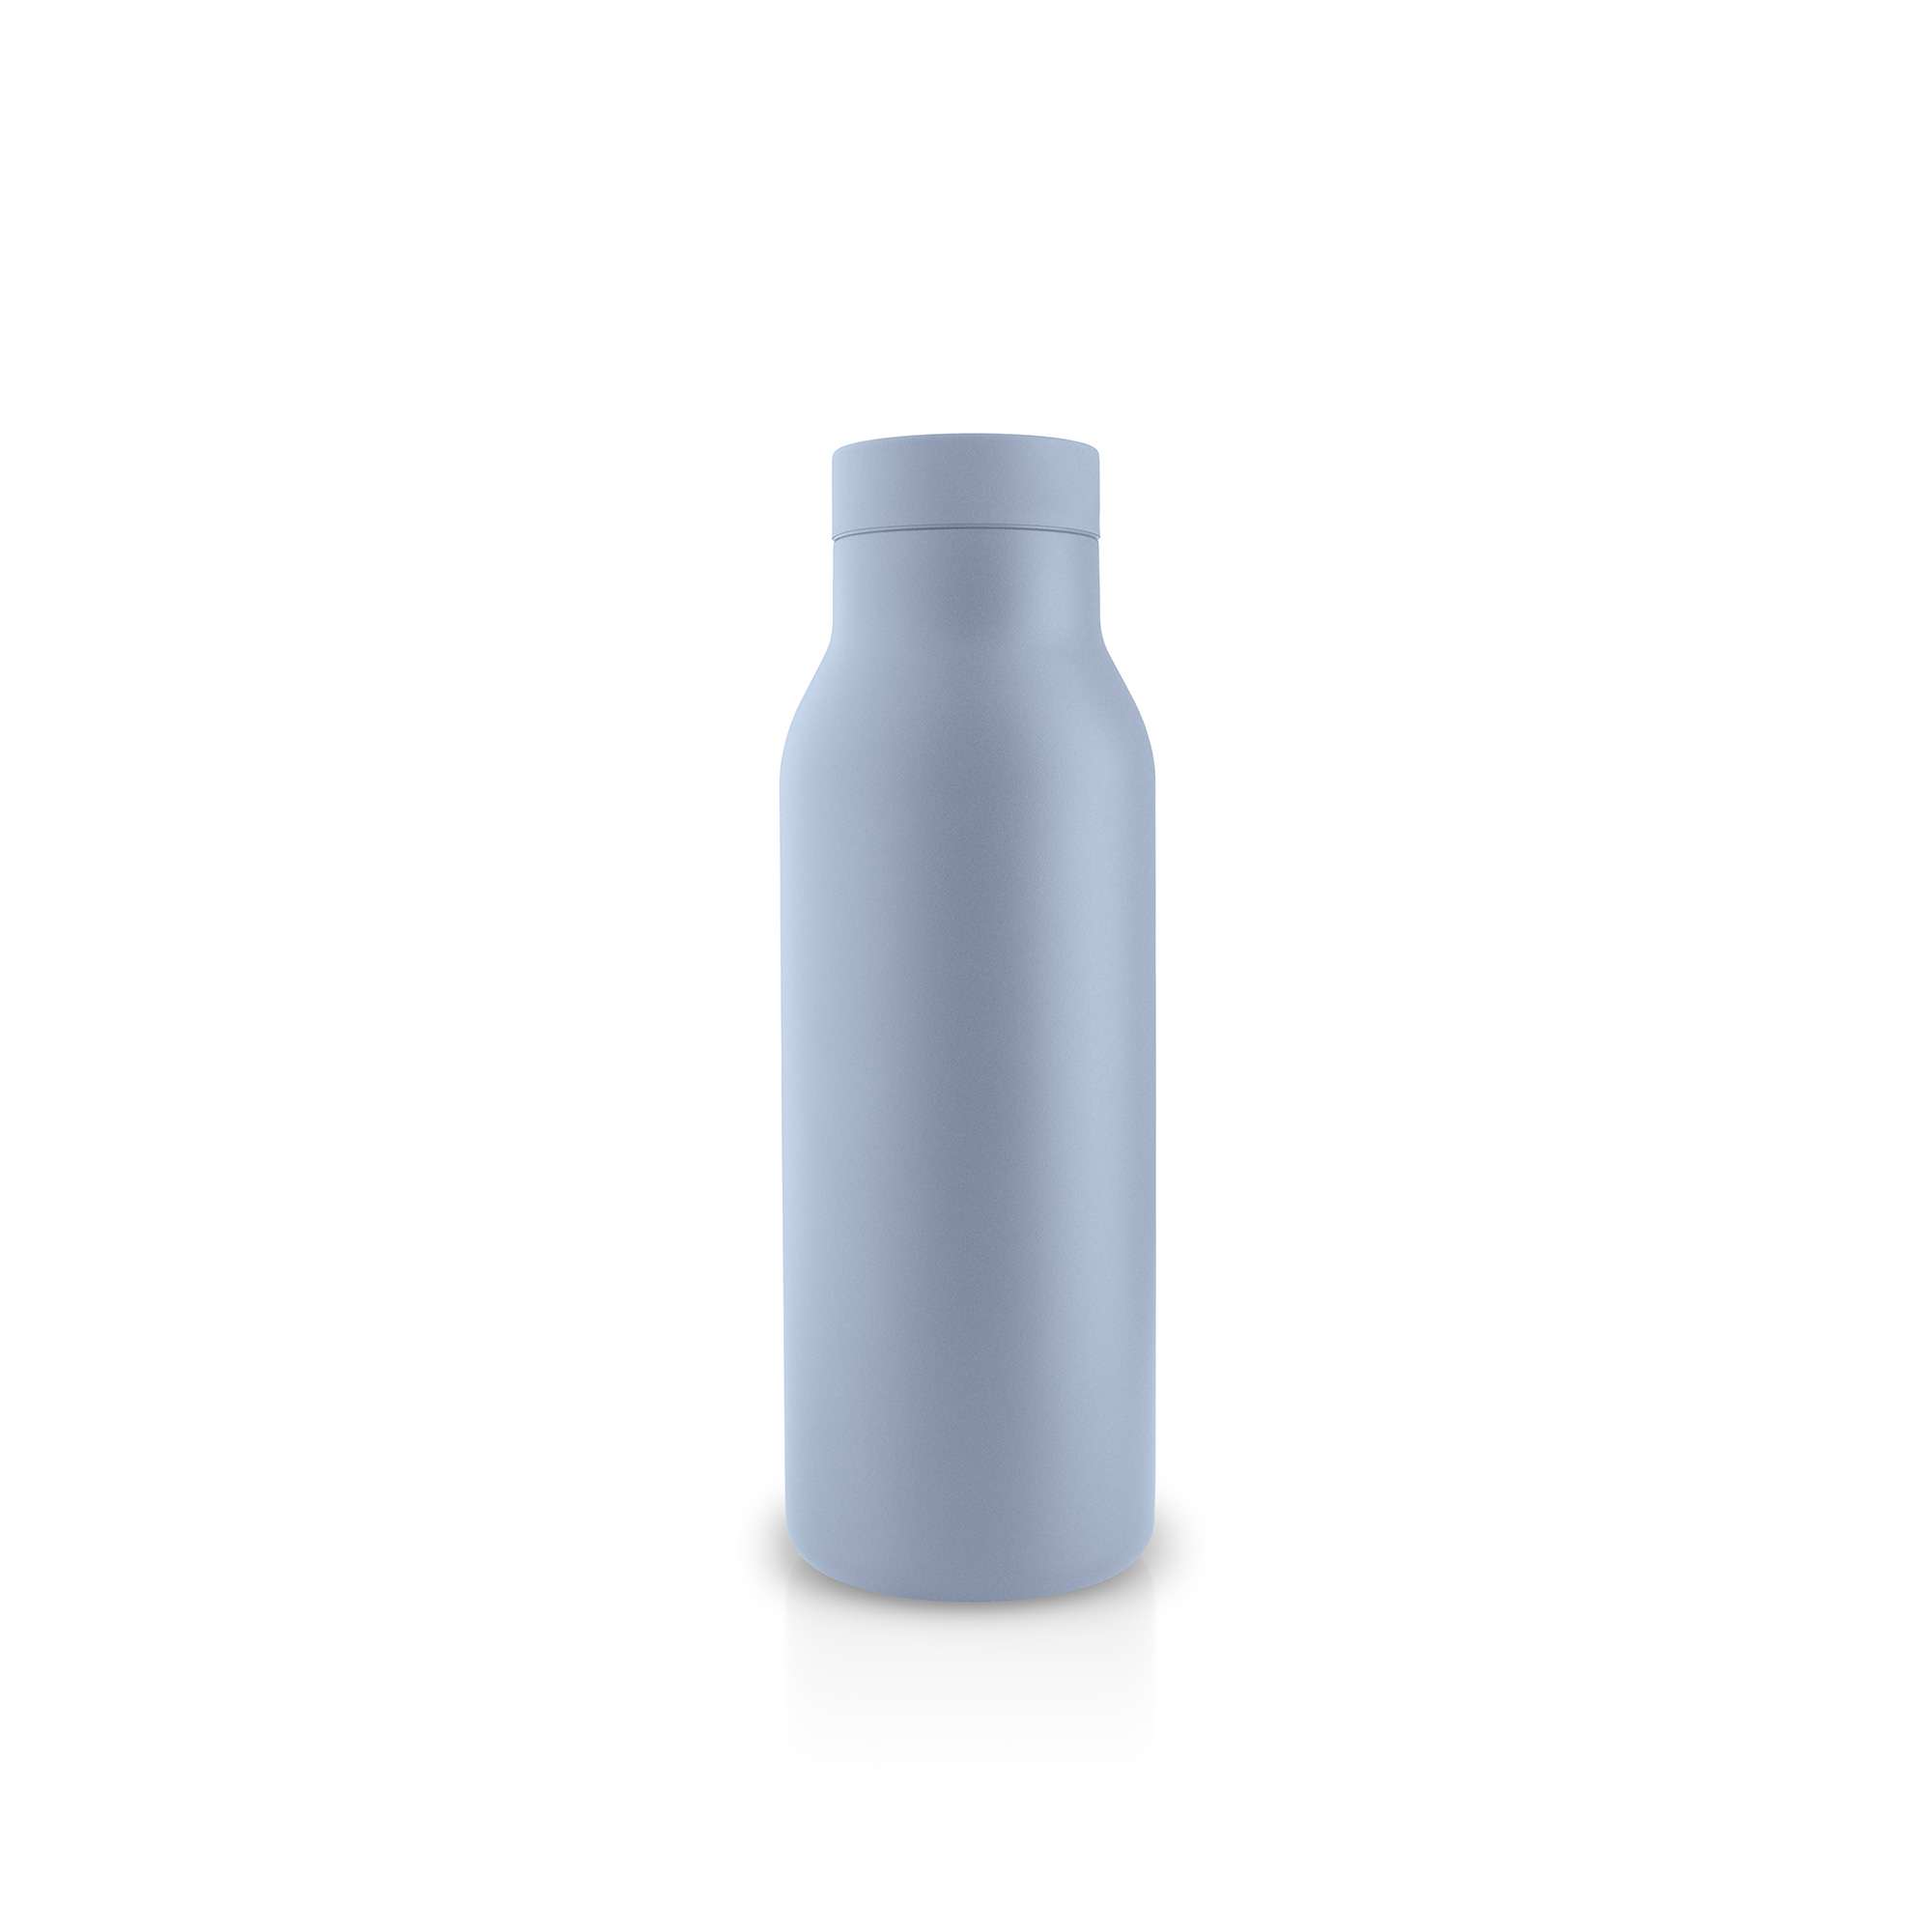 Urban thermo flask - 0.5 litres - Blue sky